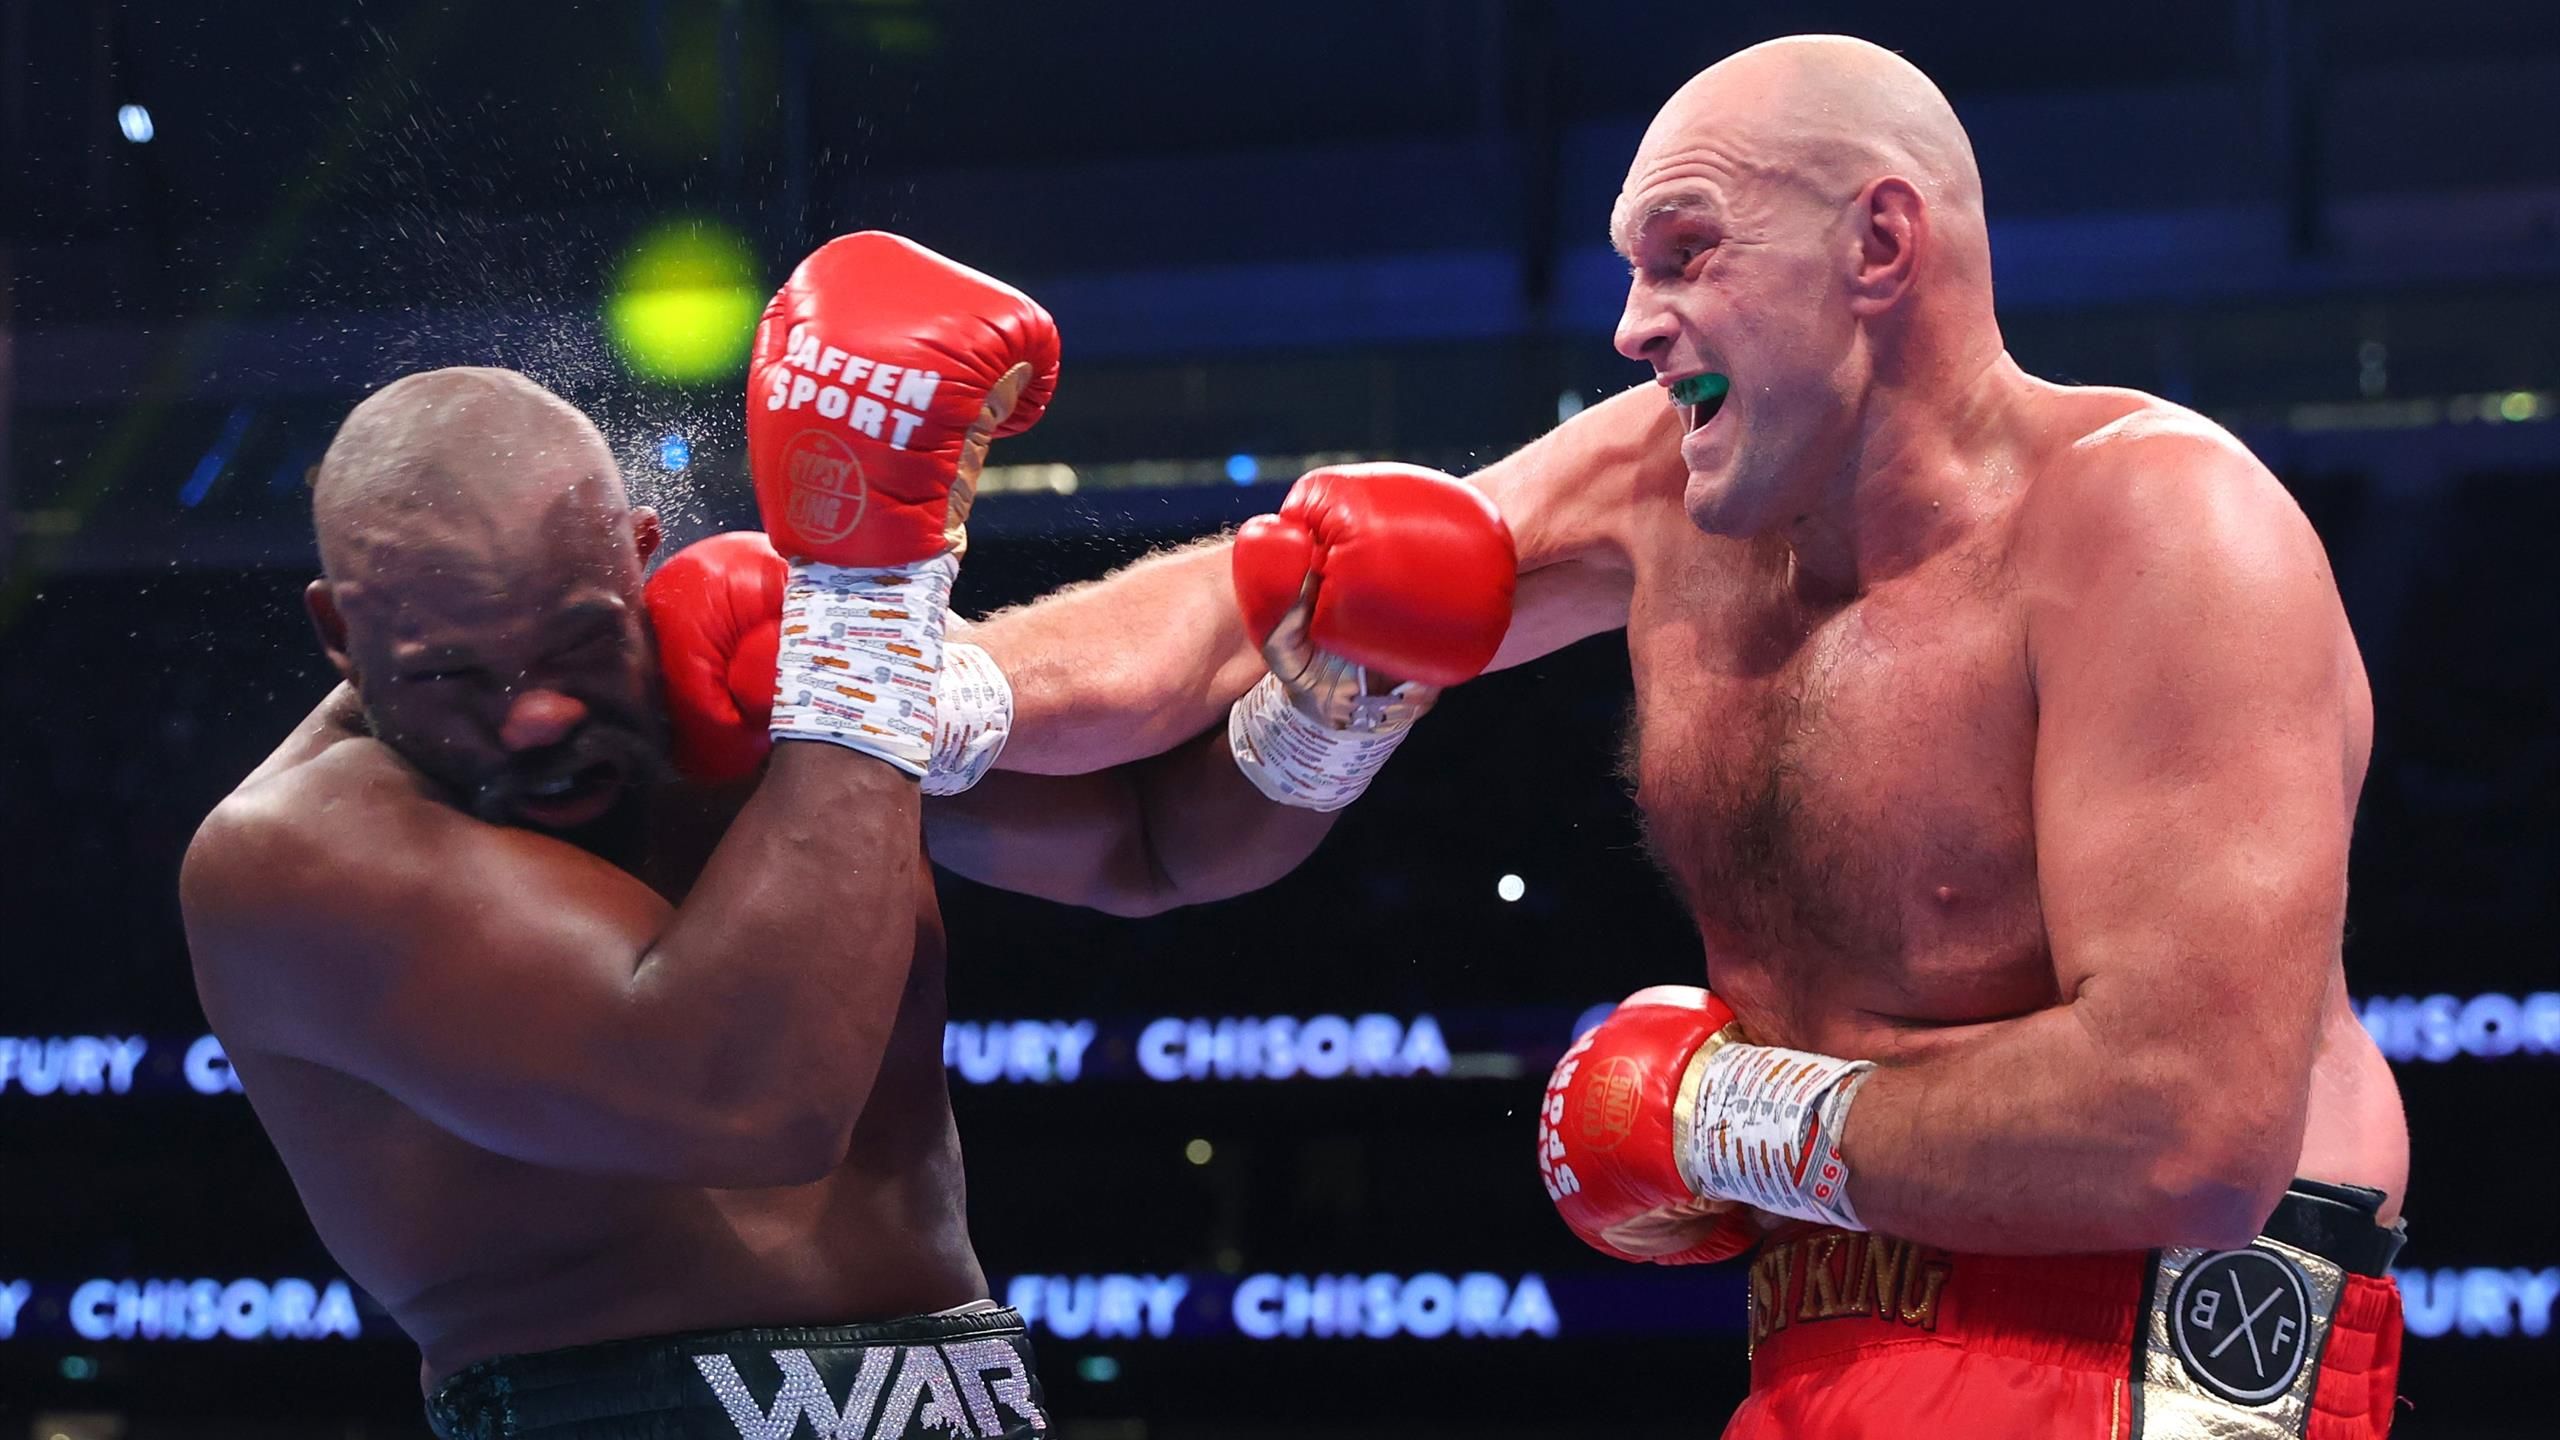 Inside The Ring With Tyson Fury: The Untold Story Of Boxing's Heavyweight Champion